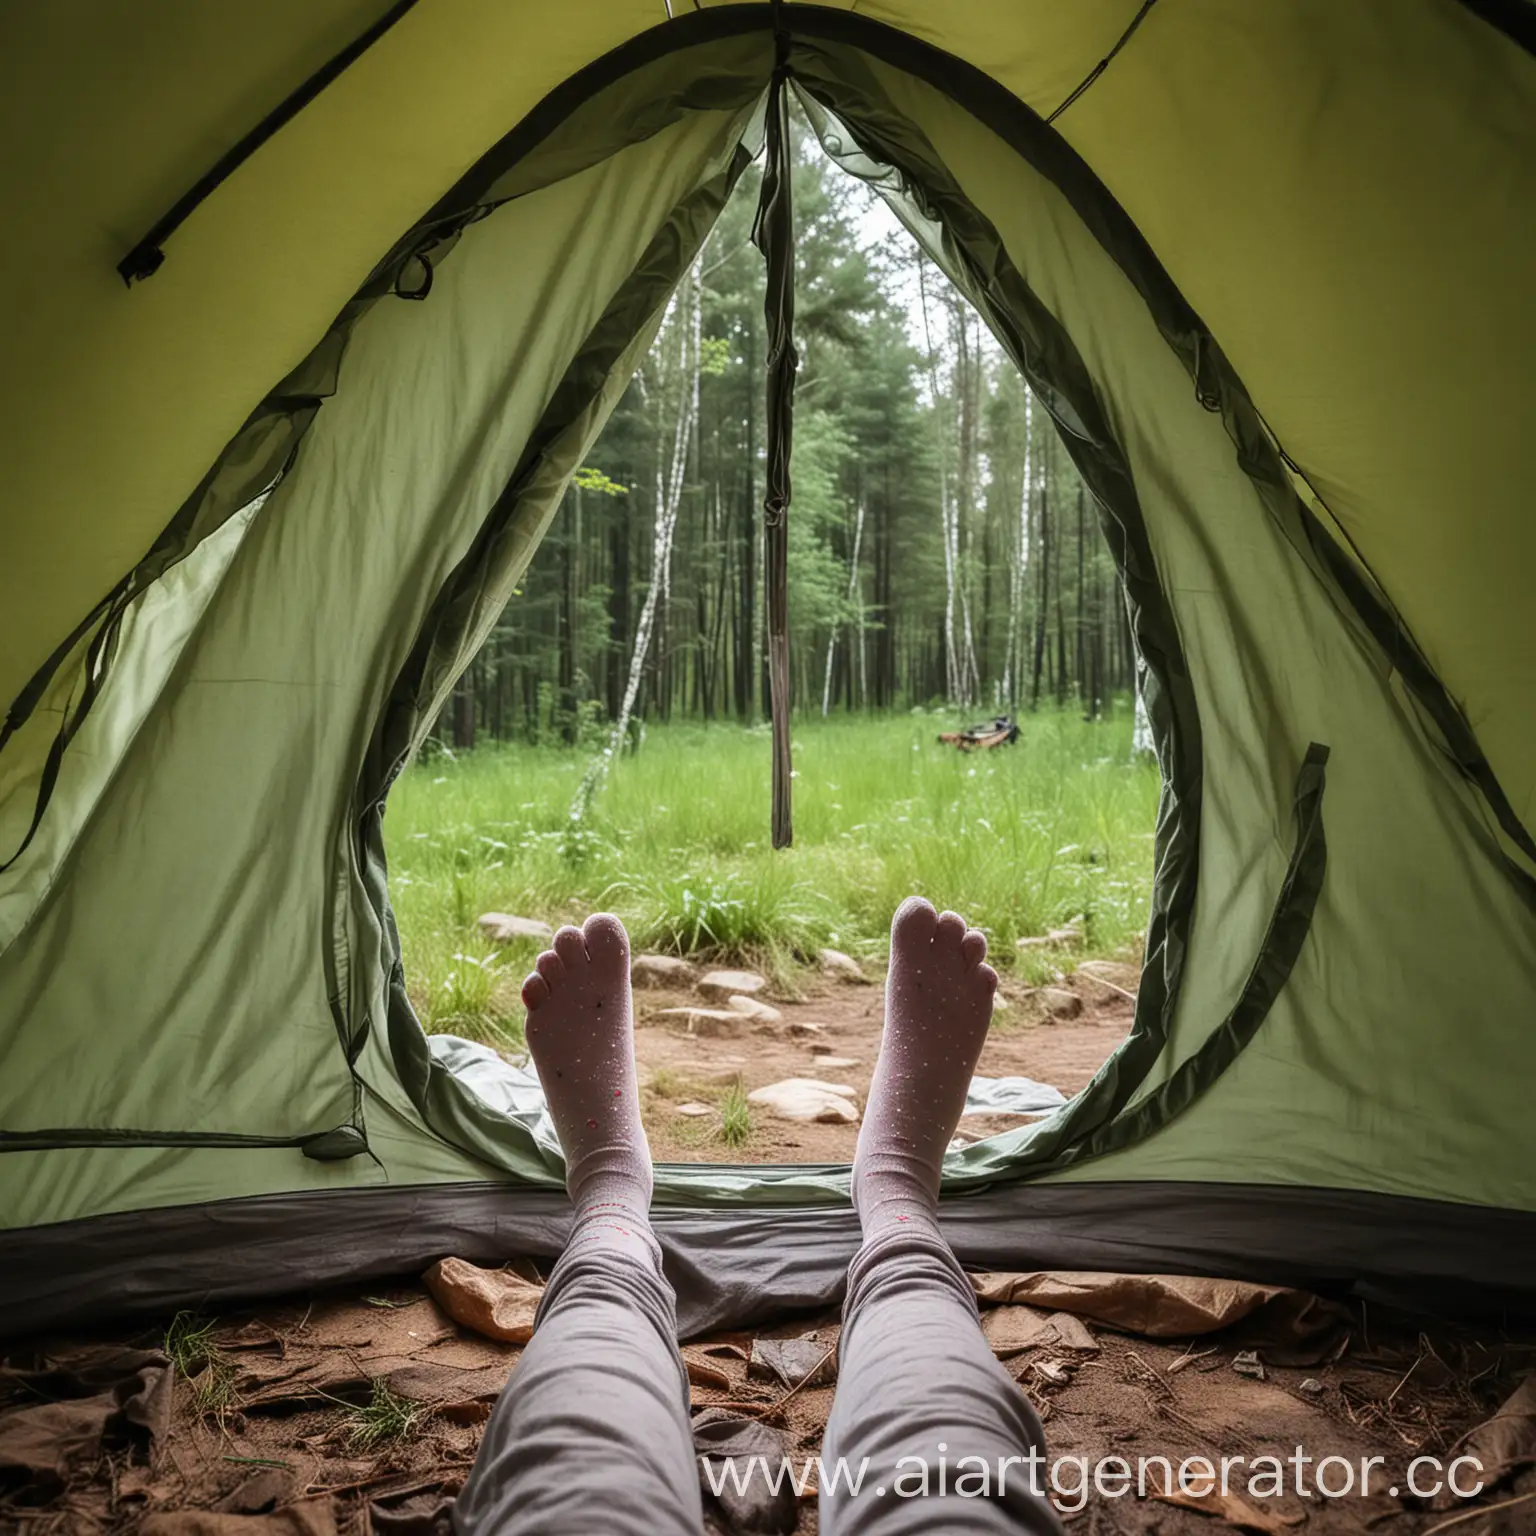 Childs-Feet-in-Socks-Peeking-Out-of-Tent-with-Open-Door-Surrounded-by-Green-Forest